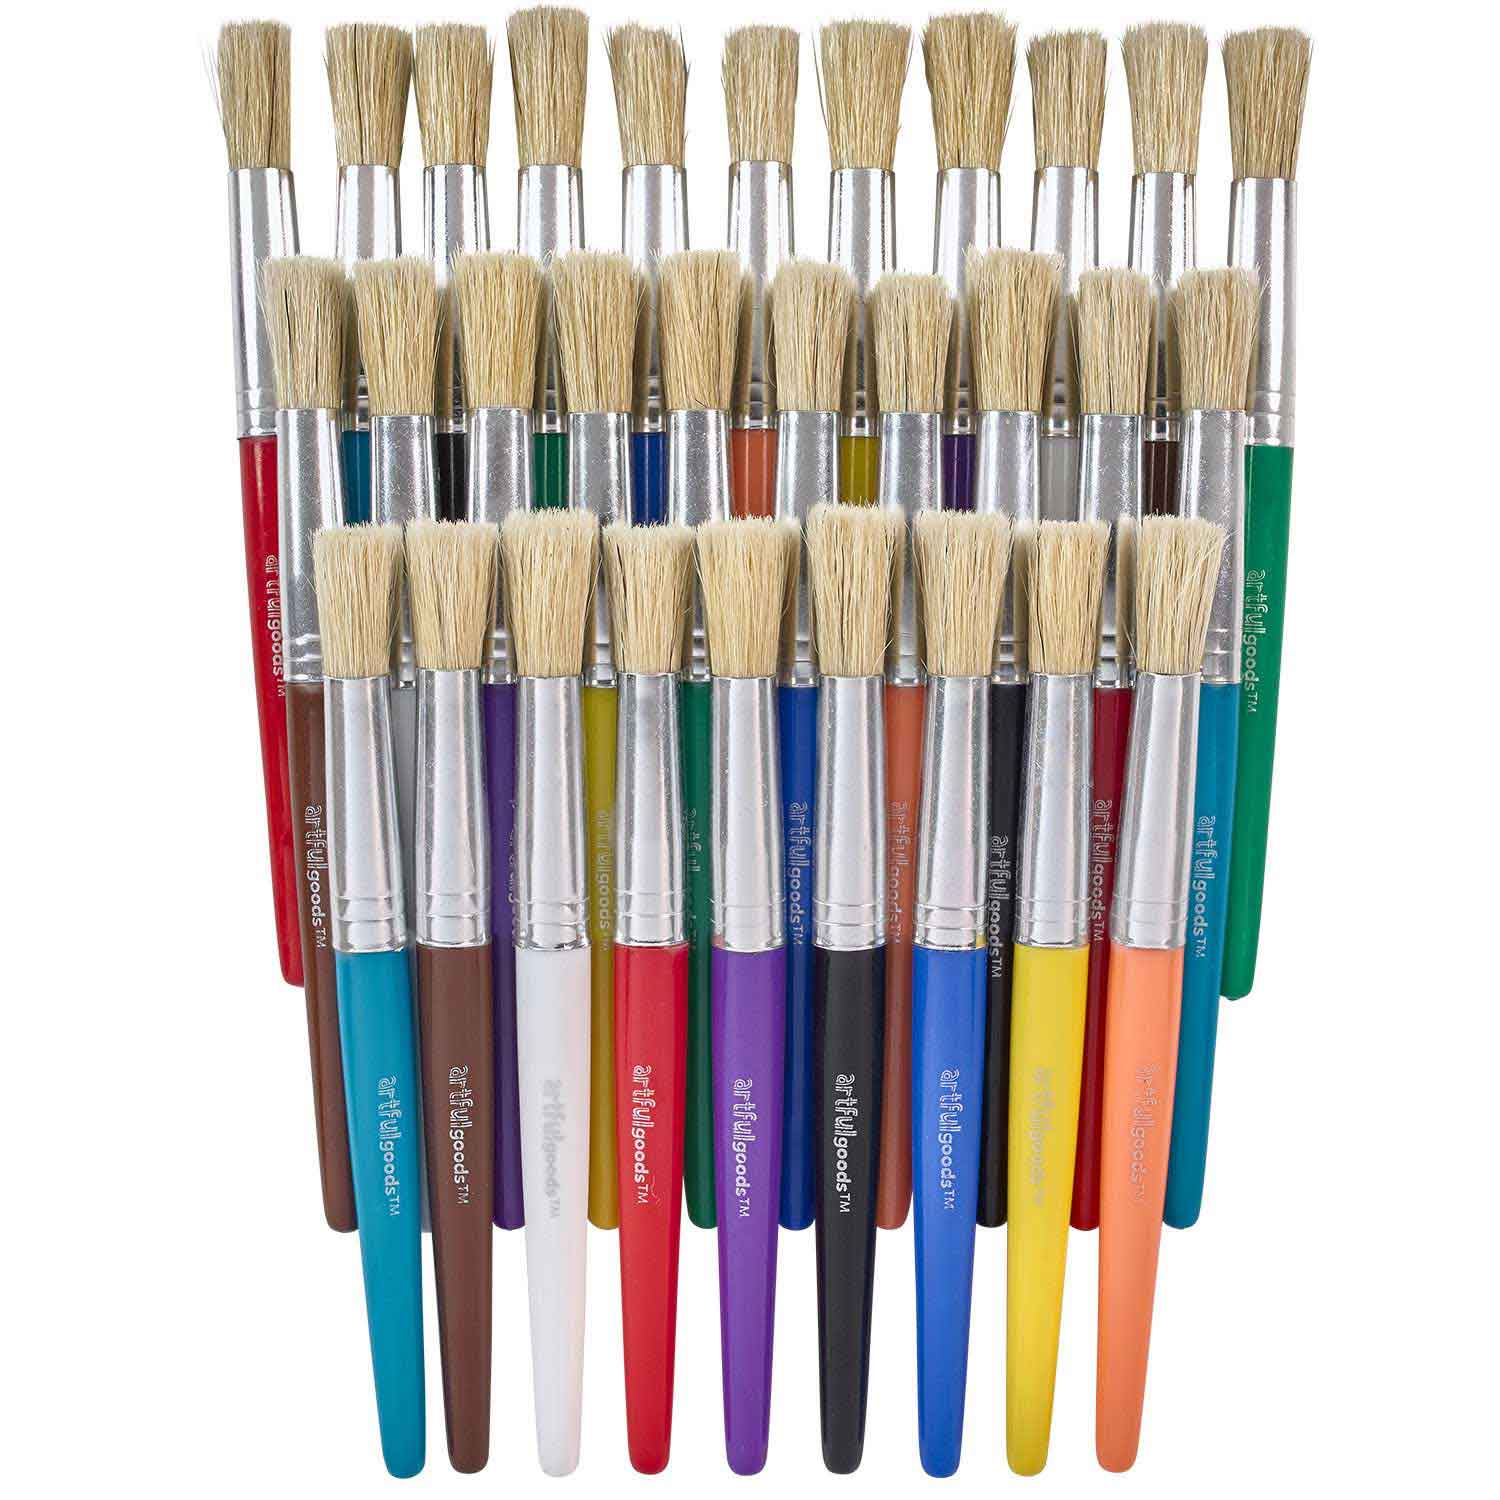 Paint Brush Set for Kids, Classroom Arts Supplies, 14 Shapes and